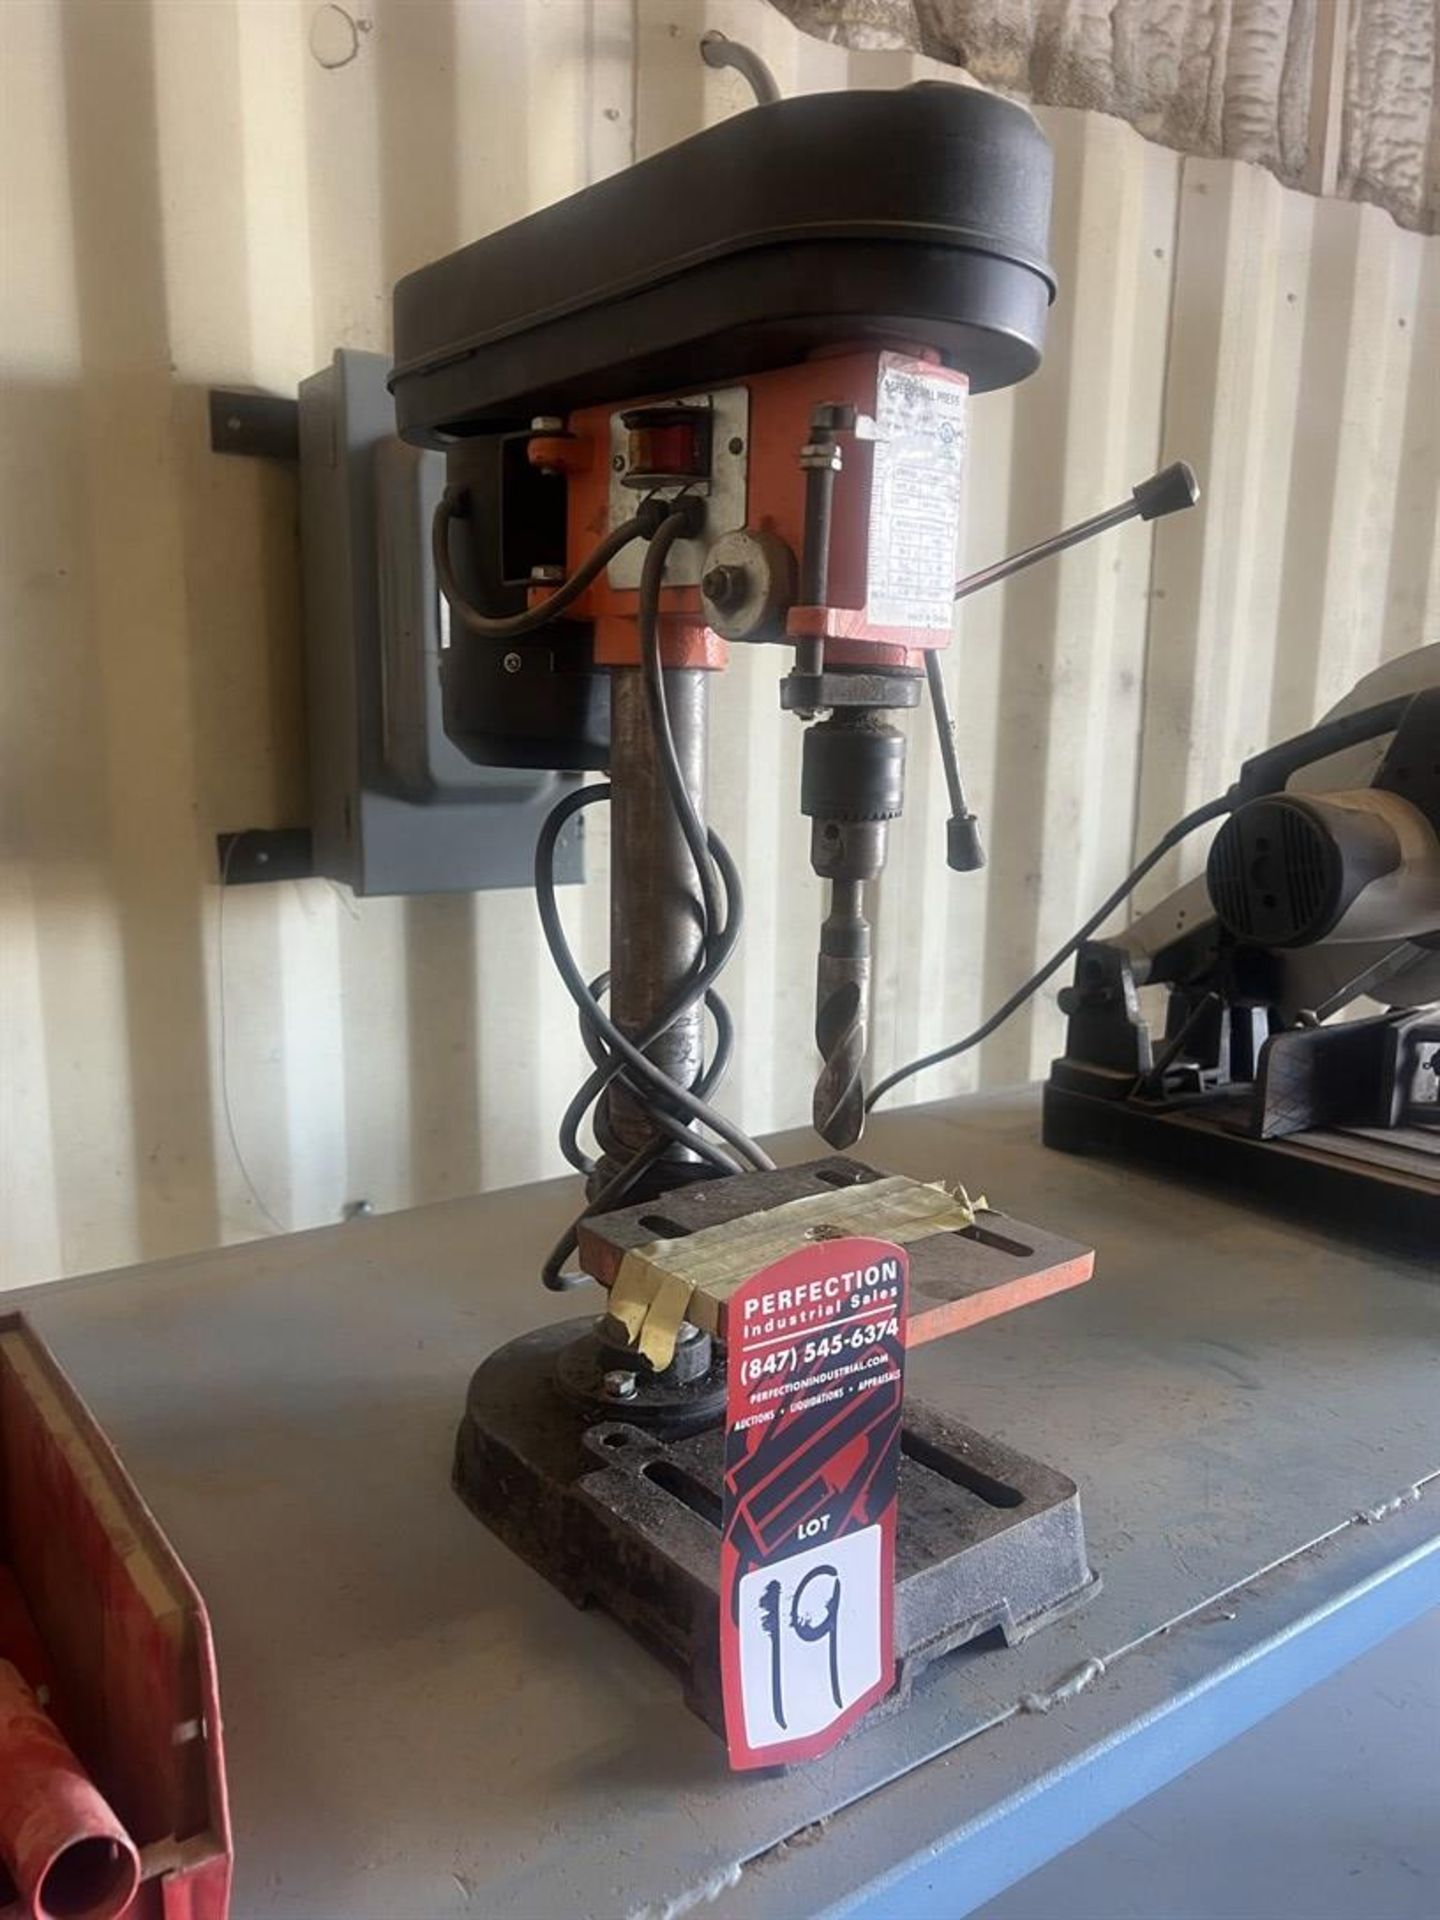 ZJ4113 5-Speed Bench Top Drill Press, 760-3070 RPM - Image 2 of 3